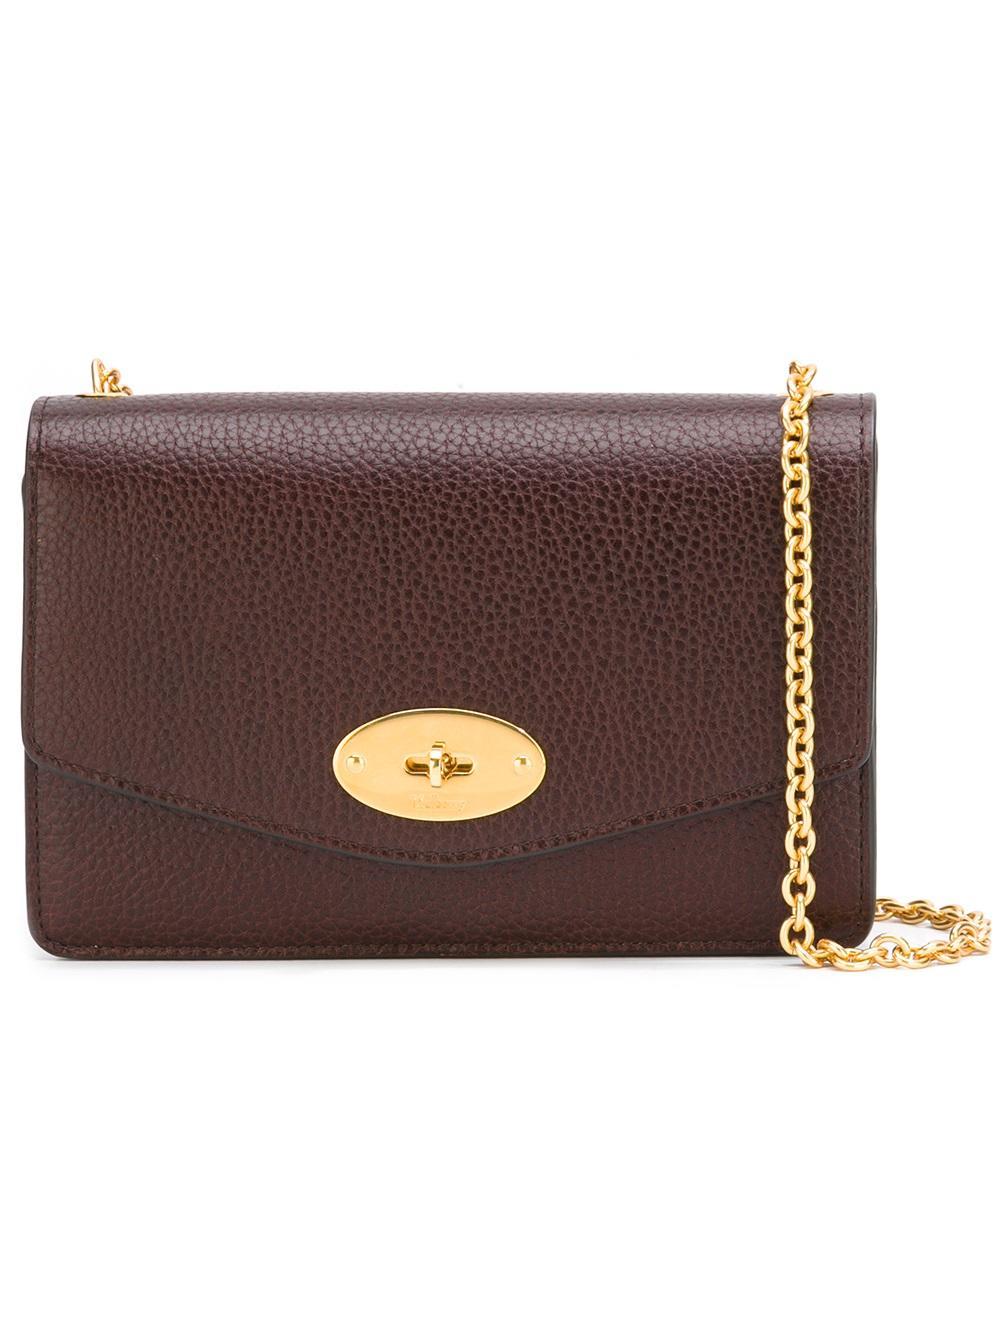 Mulberry Chain Strap Crossbody Bag in Red | Lyst